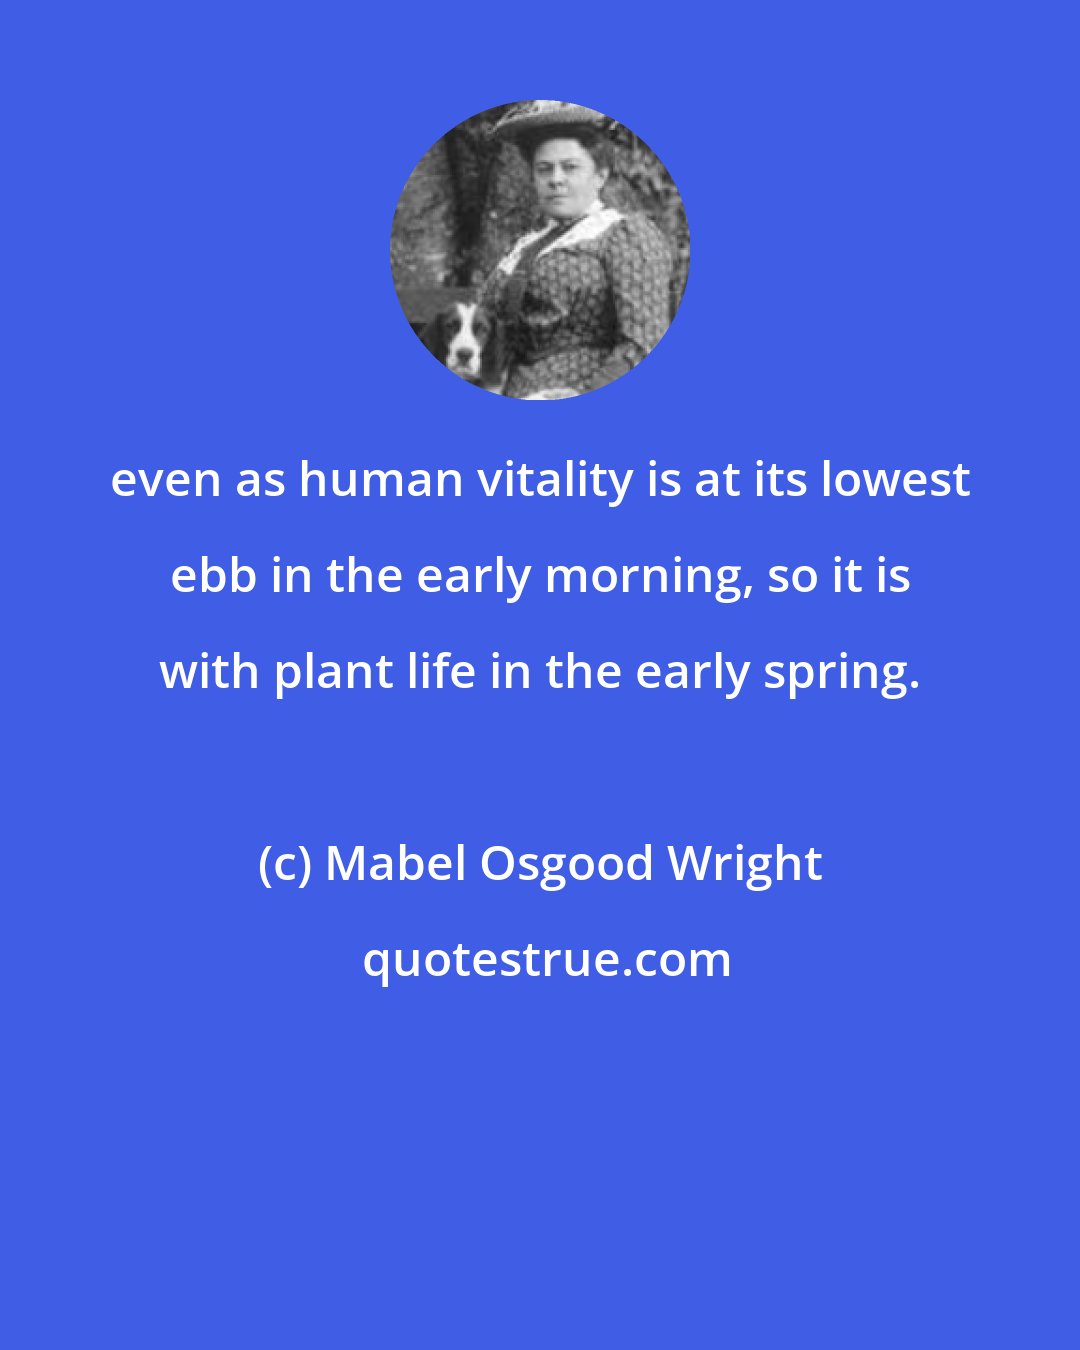 Mabel Osgood Wright: even as human vitality is at its lowest ebb in the early morning, so it is with plant life in the early spring.